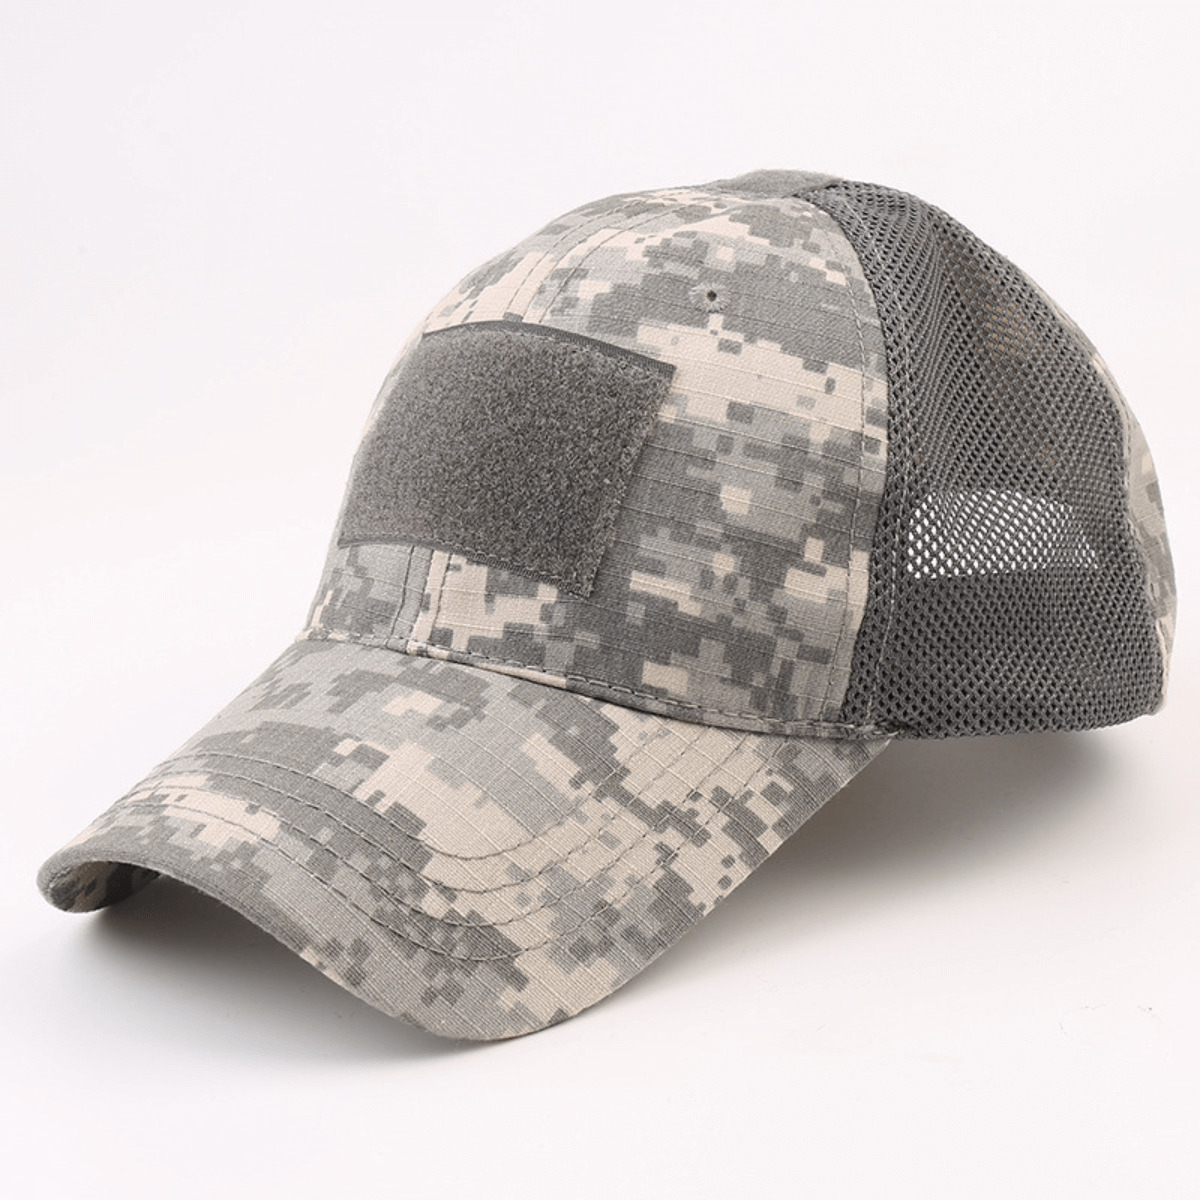 Tactical-Style Patch Hat With Adjustable Strap - Black